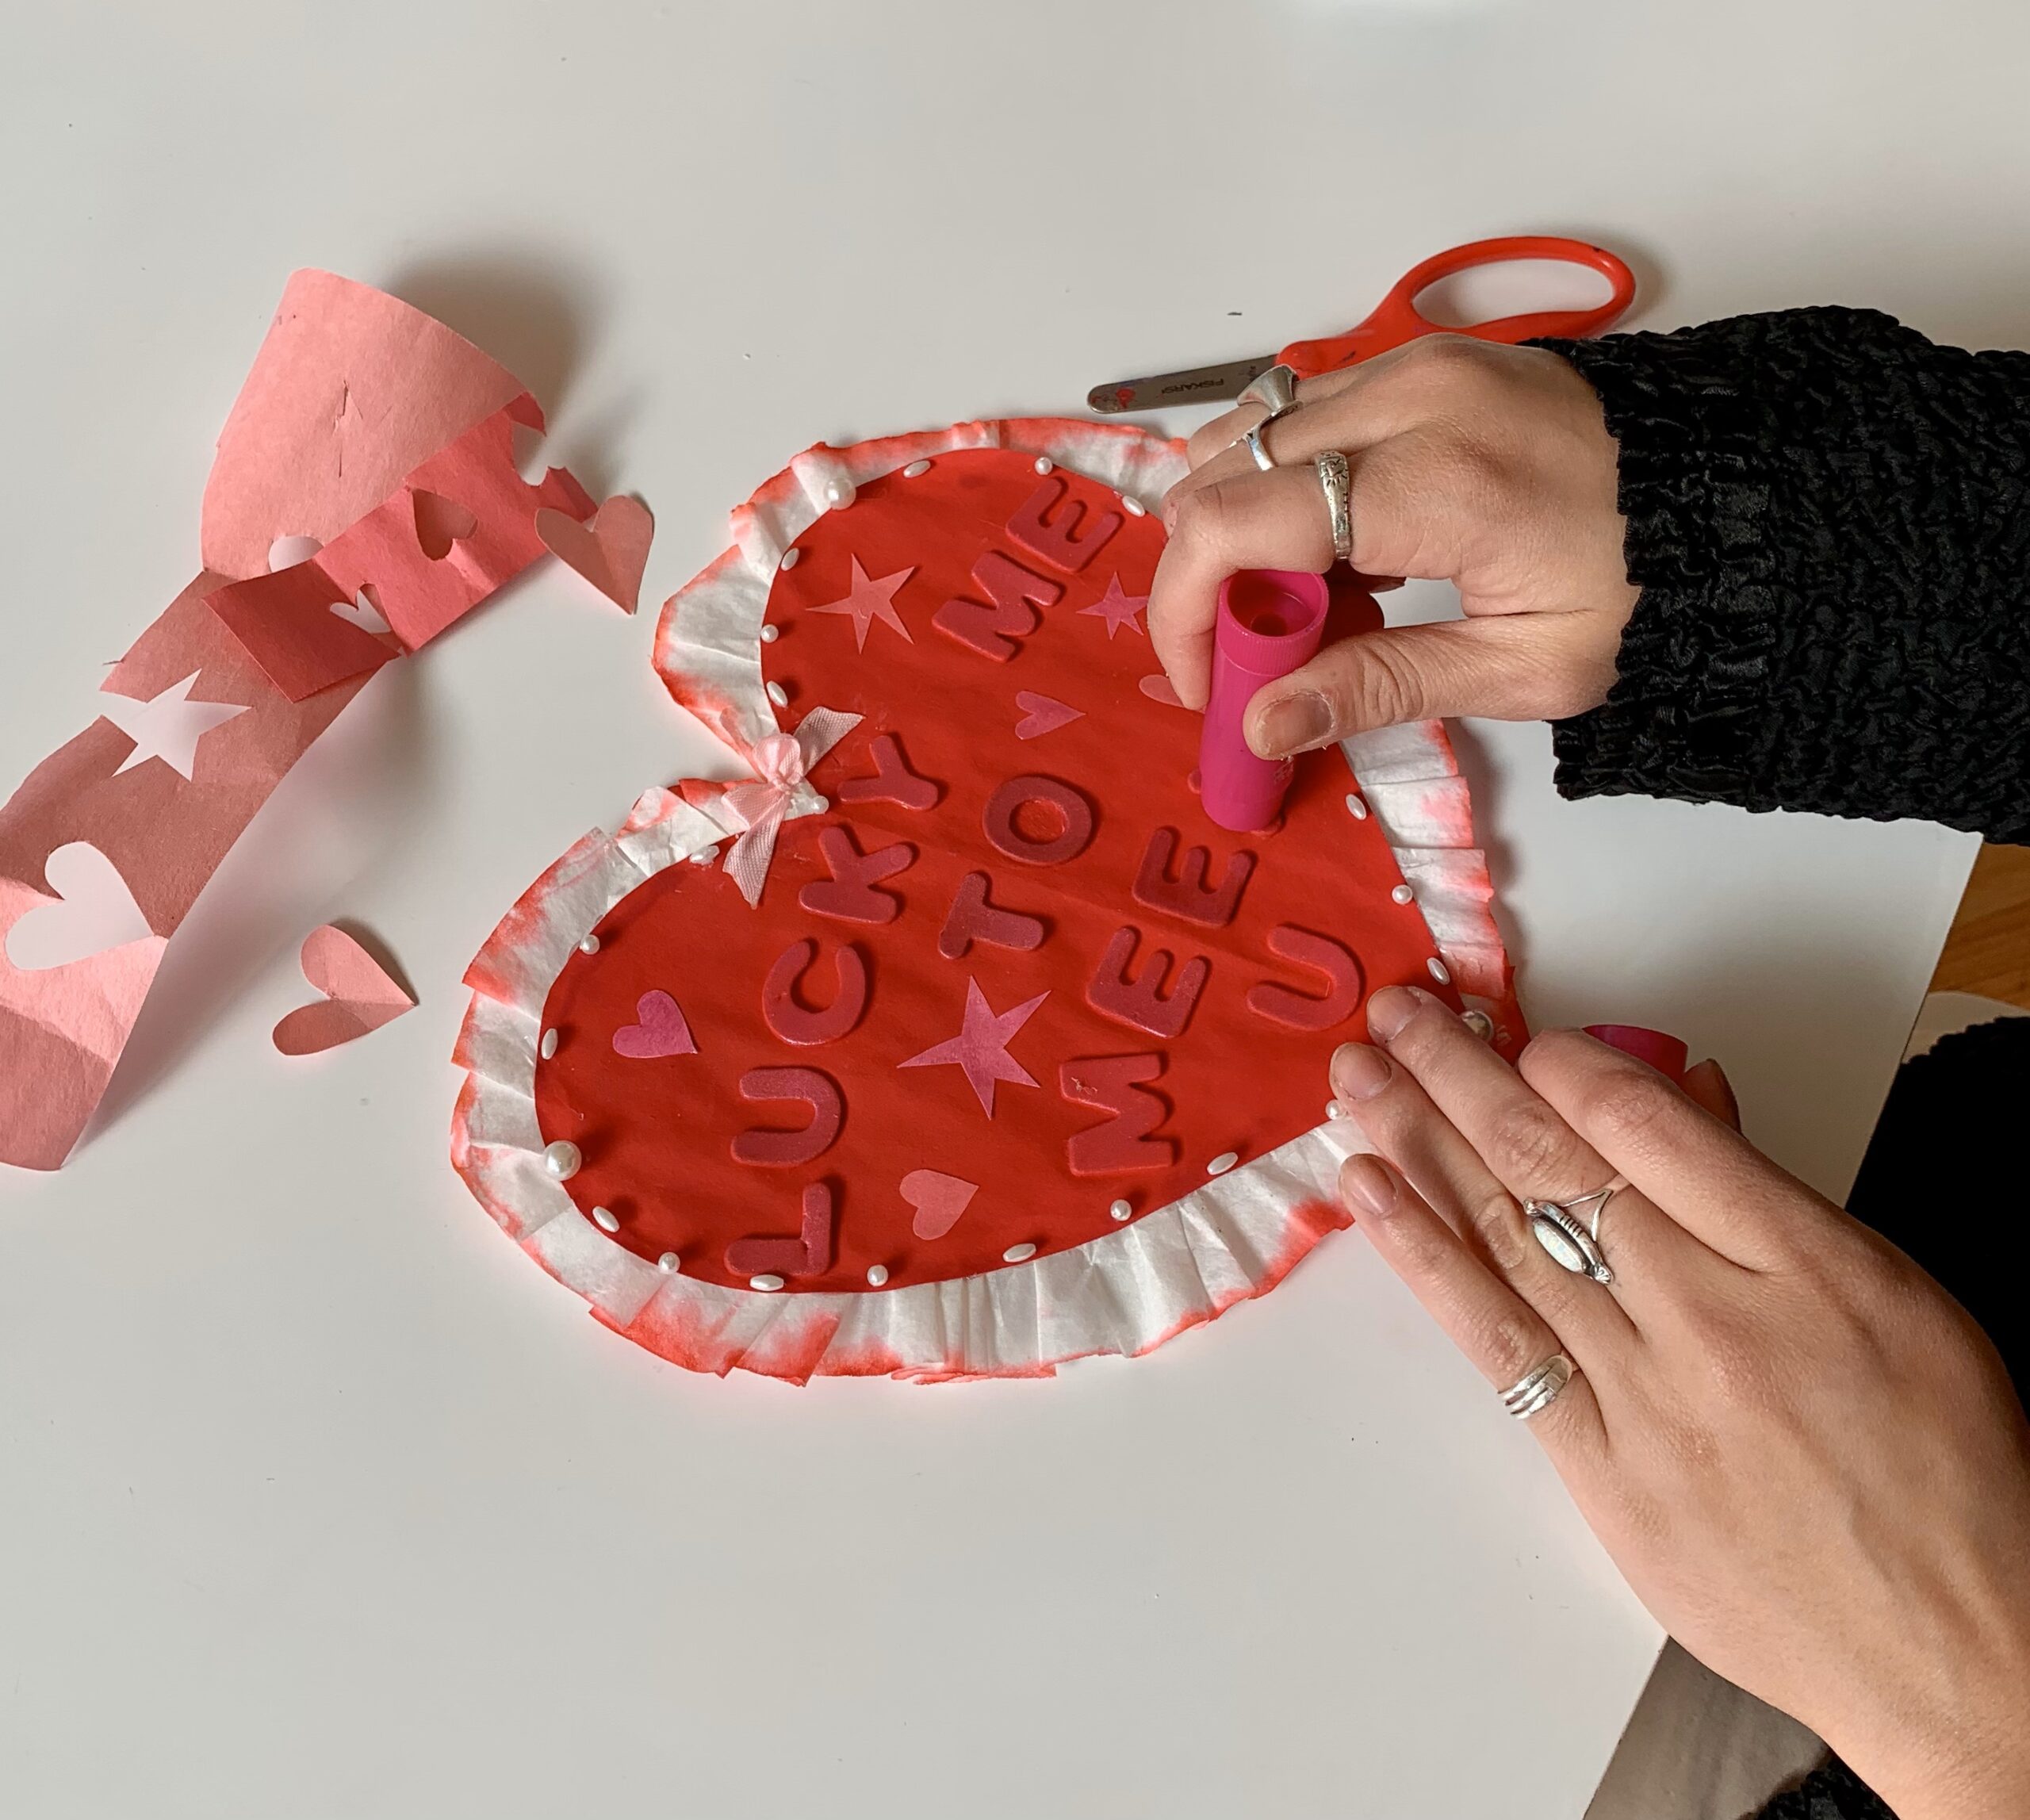 Hands of a person wearing rings and a black sweater working on a craft project. Project includes a paper heart with lettering that says "Lucky Me To Meet U."